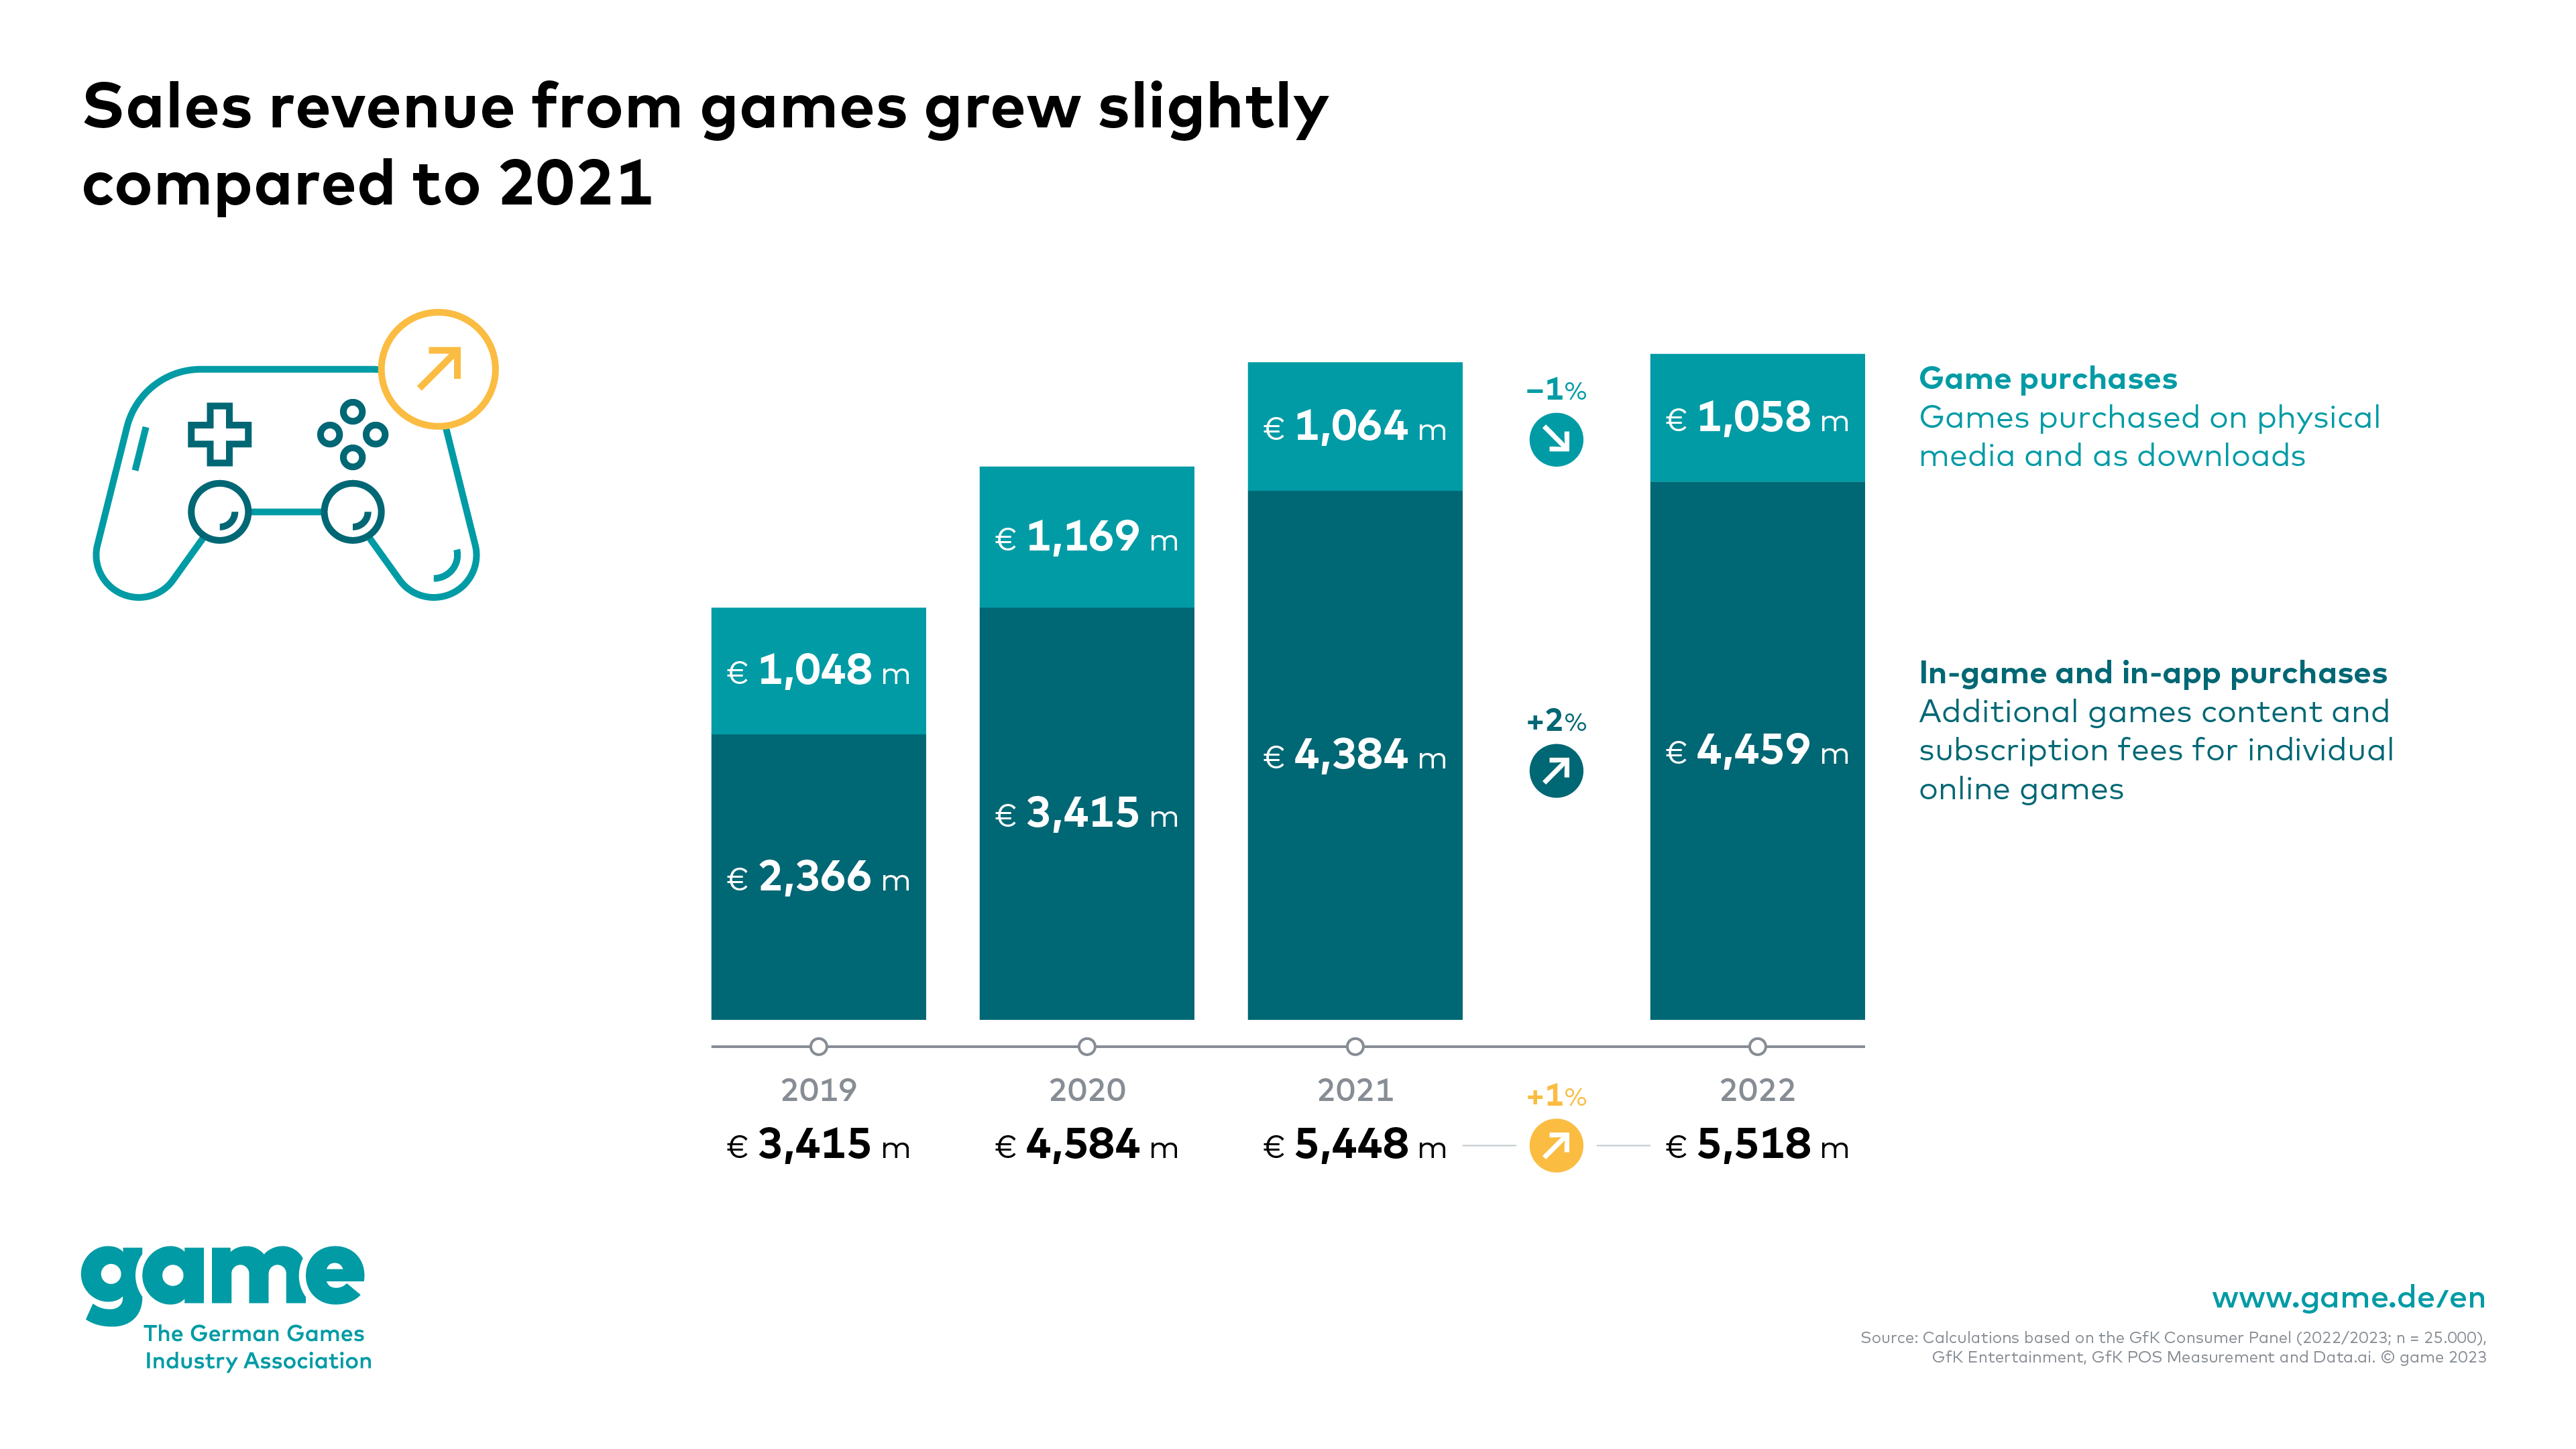 Sales revenue from games grew slightly compared to 2021